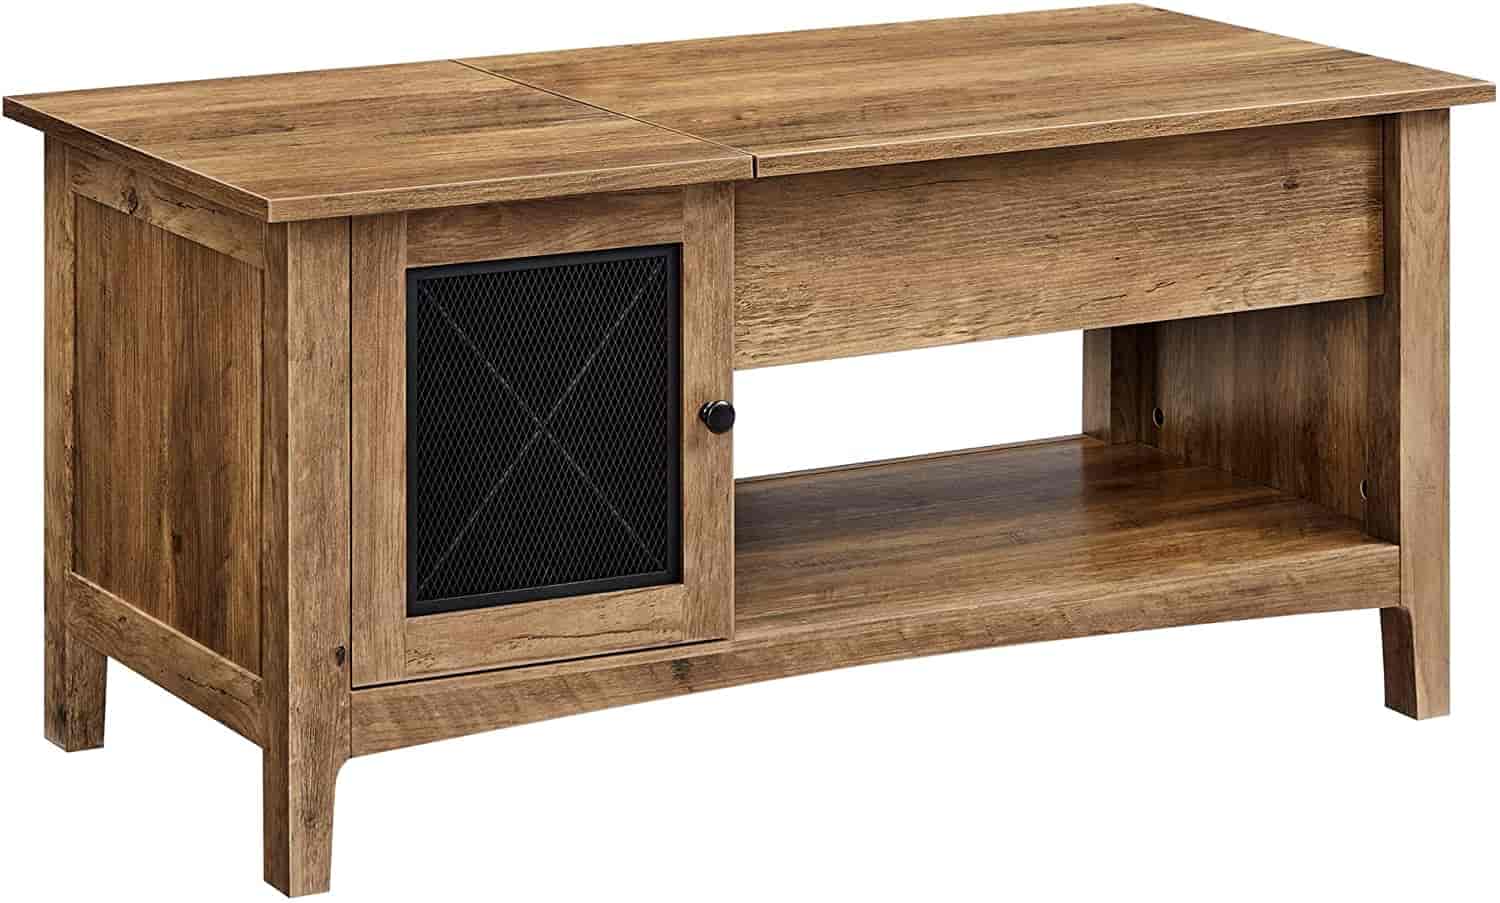 Best Coffee Table with Storage| Center Table with Hidden Compartment